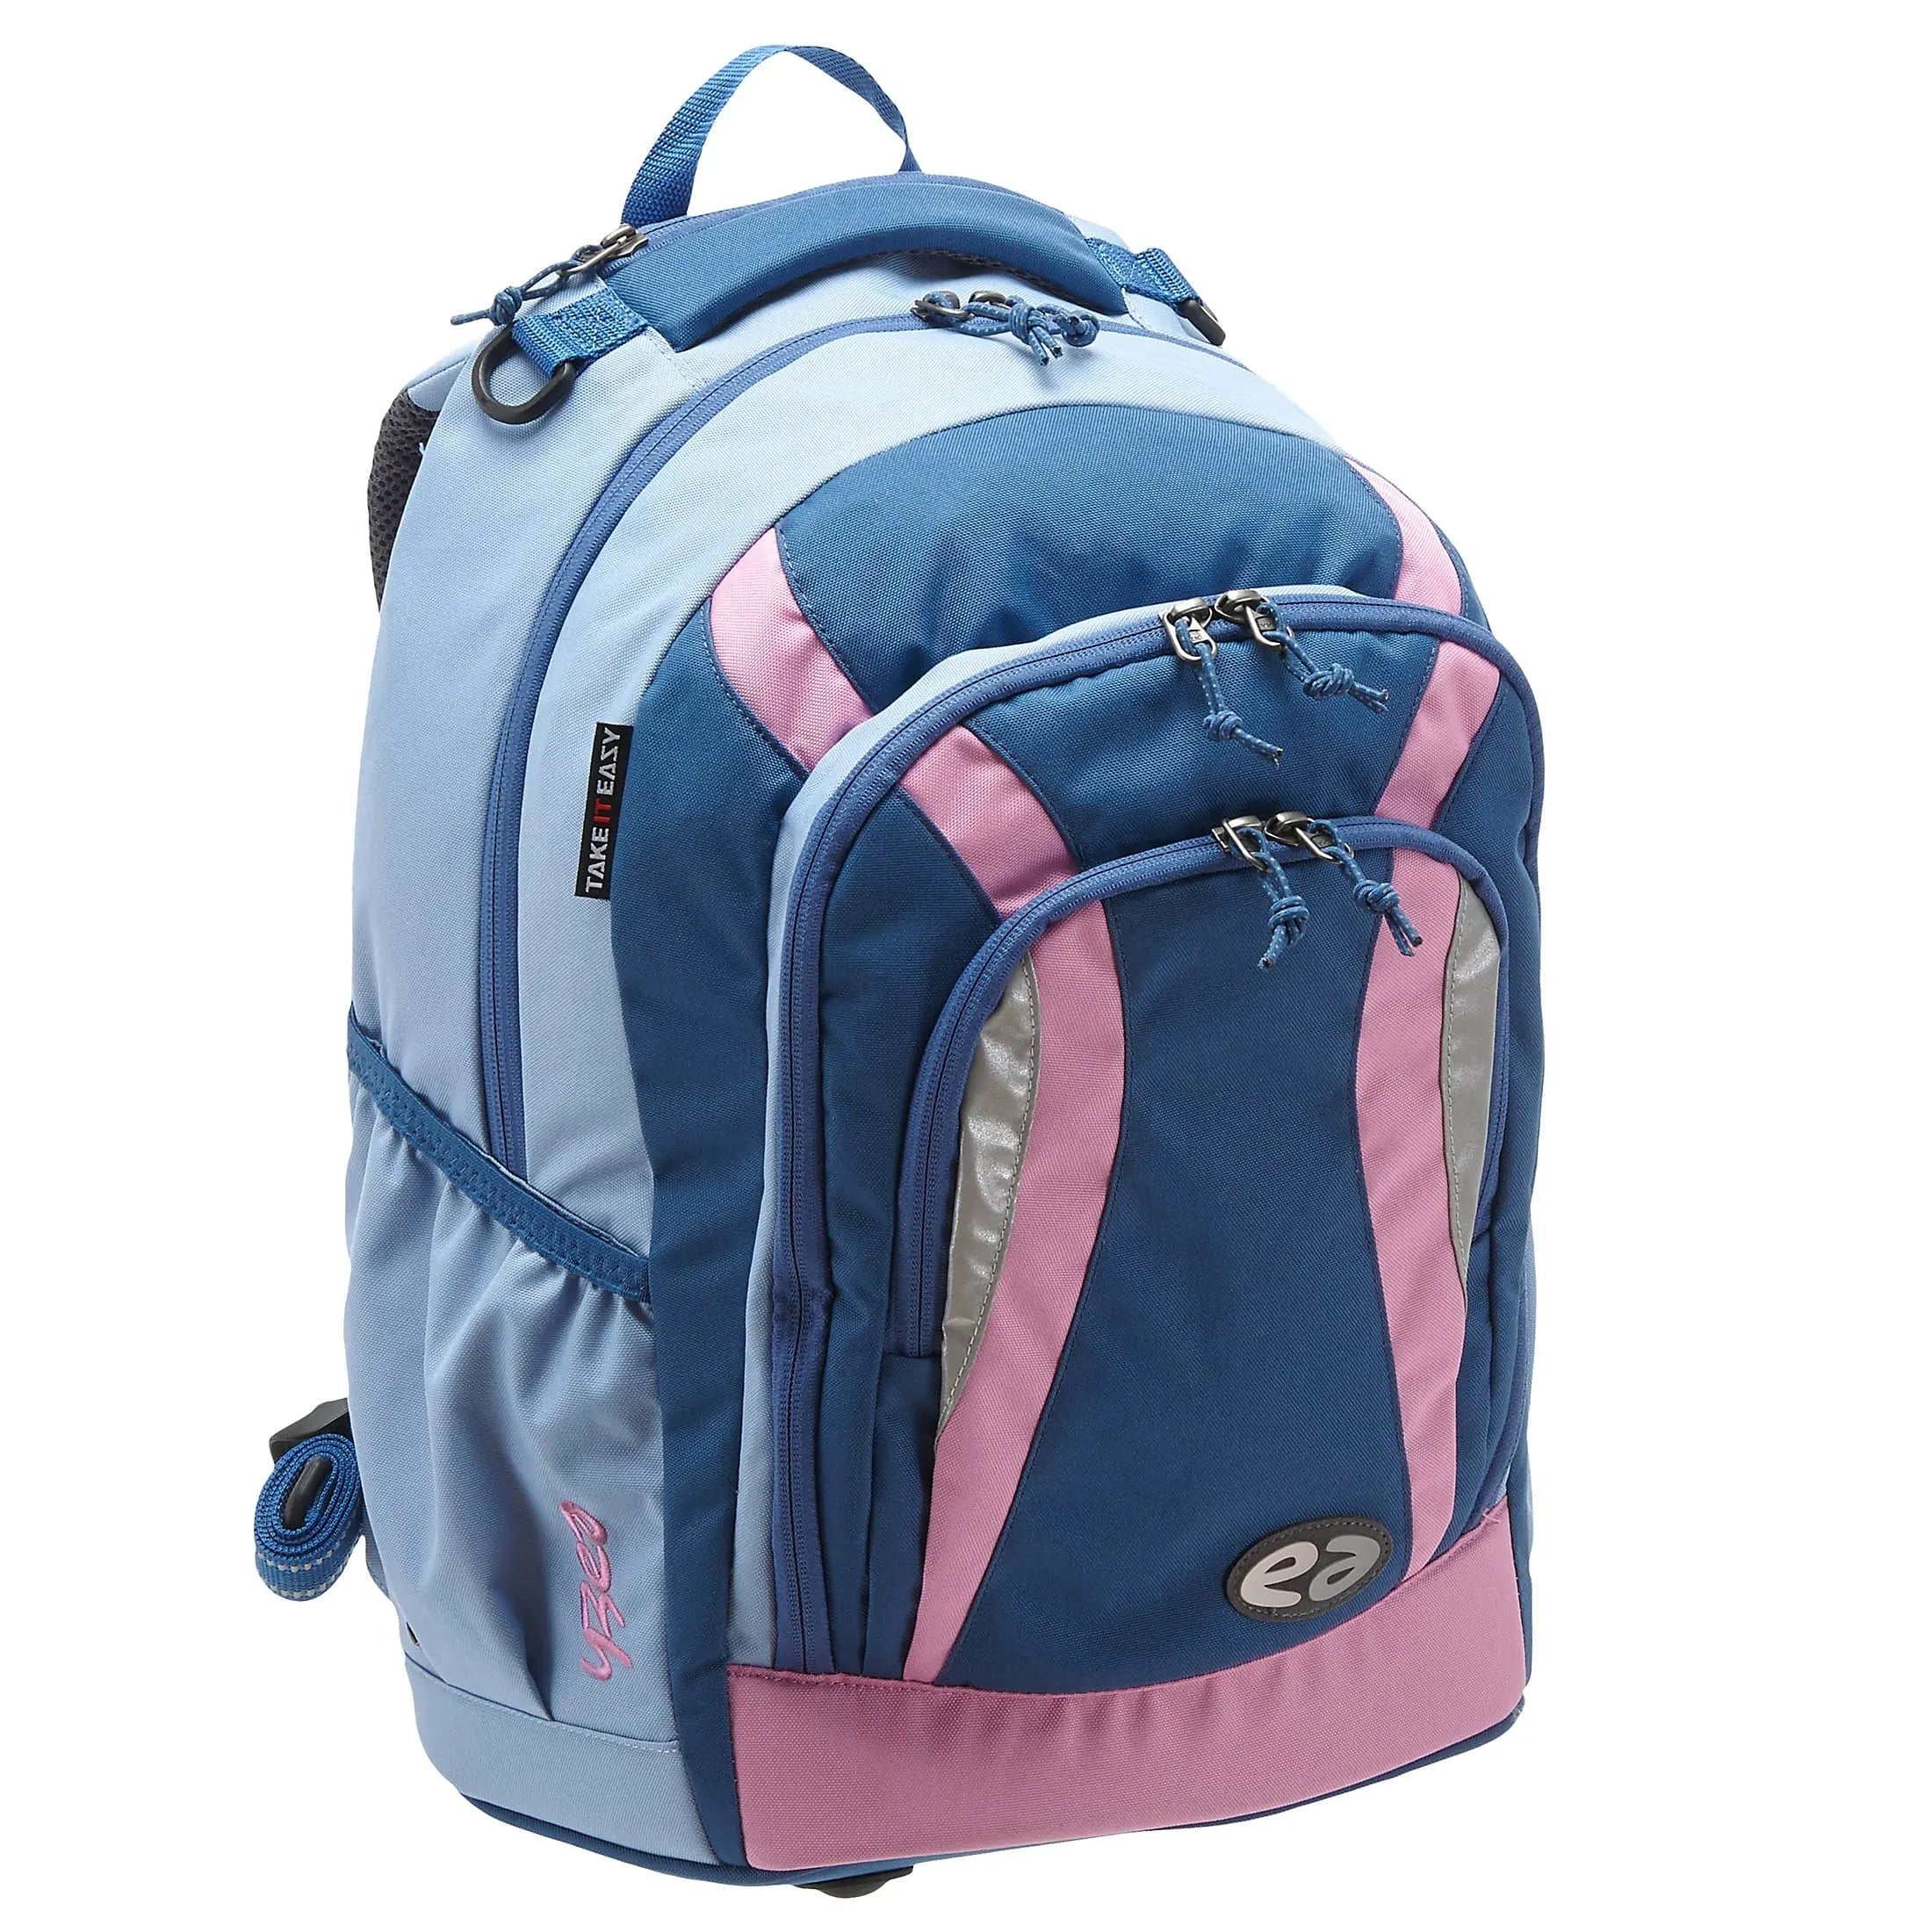 Take it Easy YZEA Go backpack 46 cm - chill